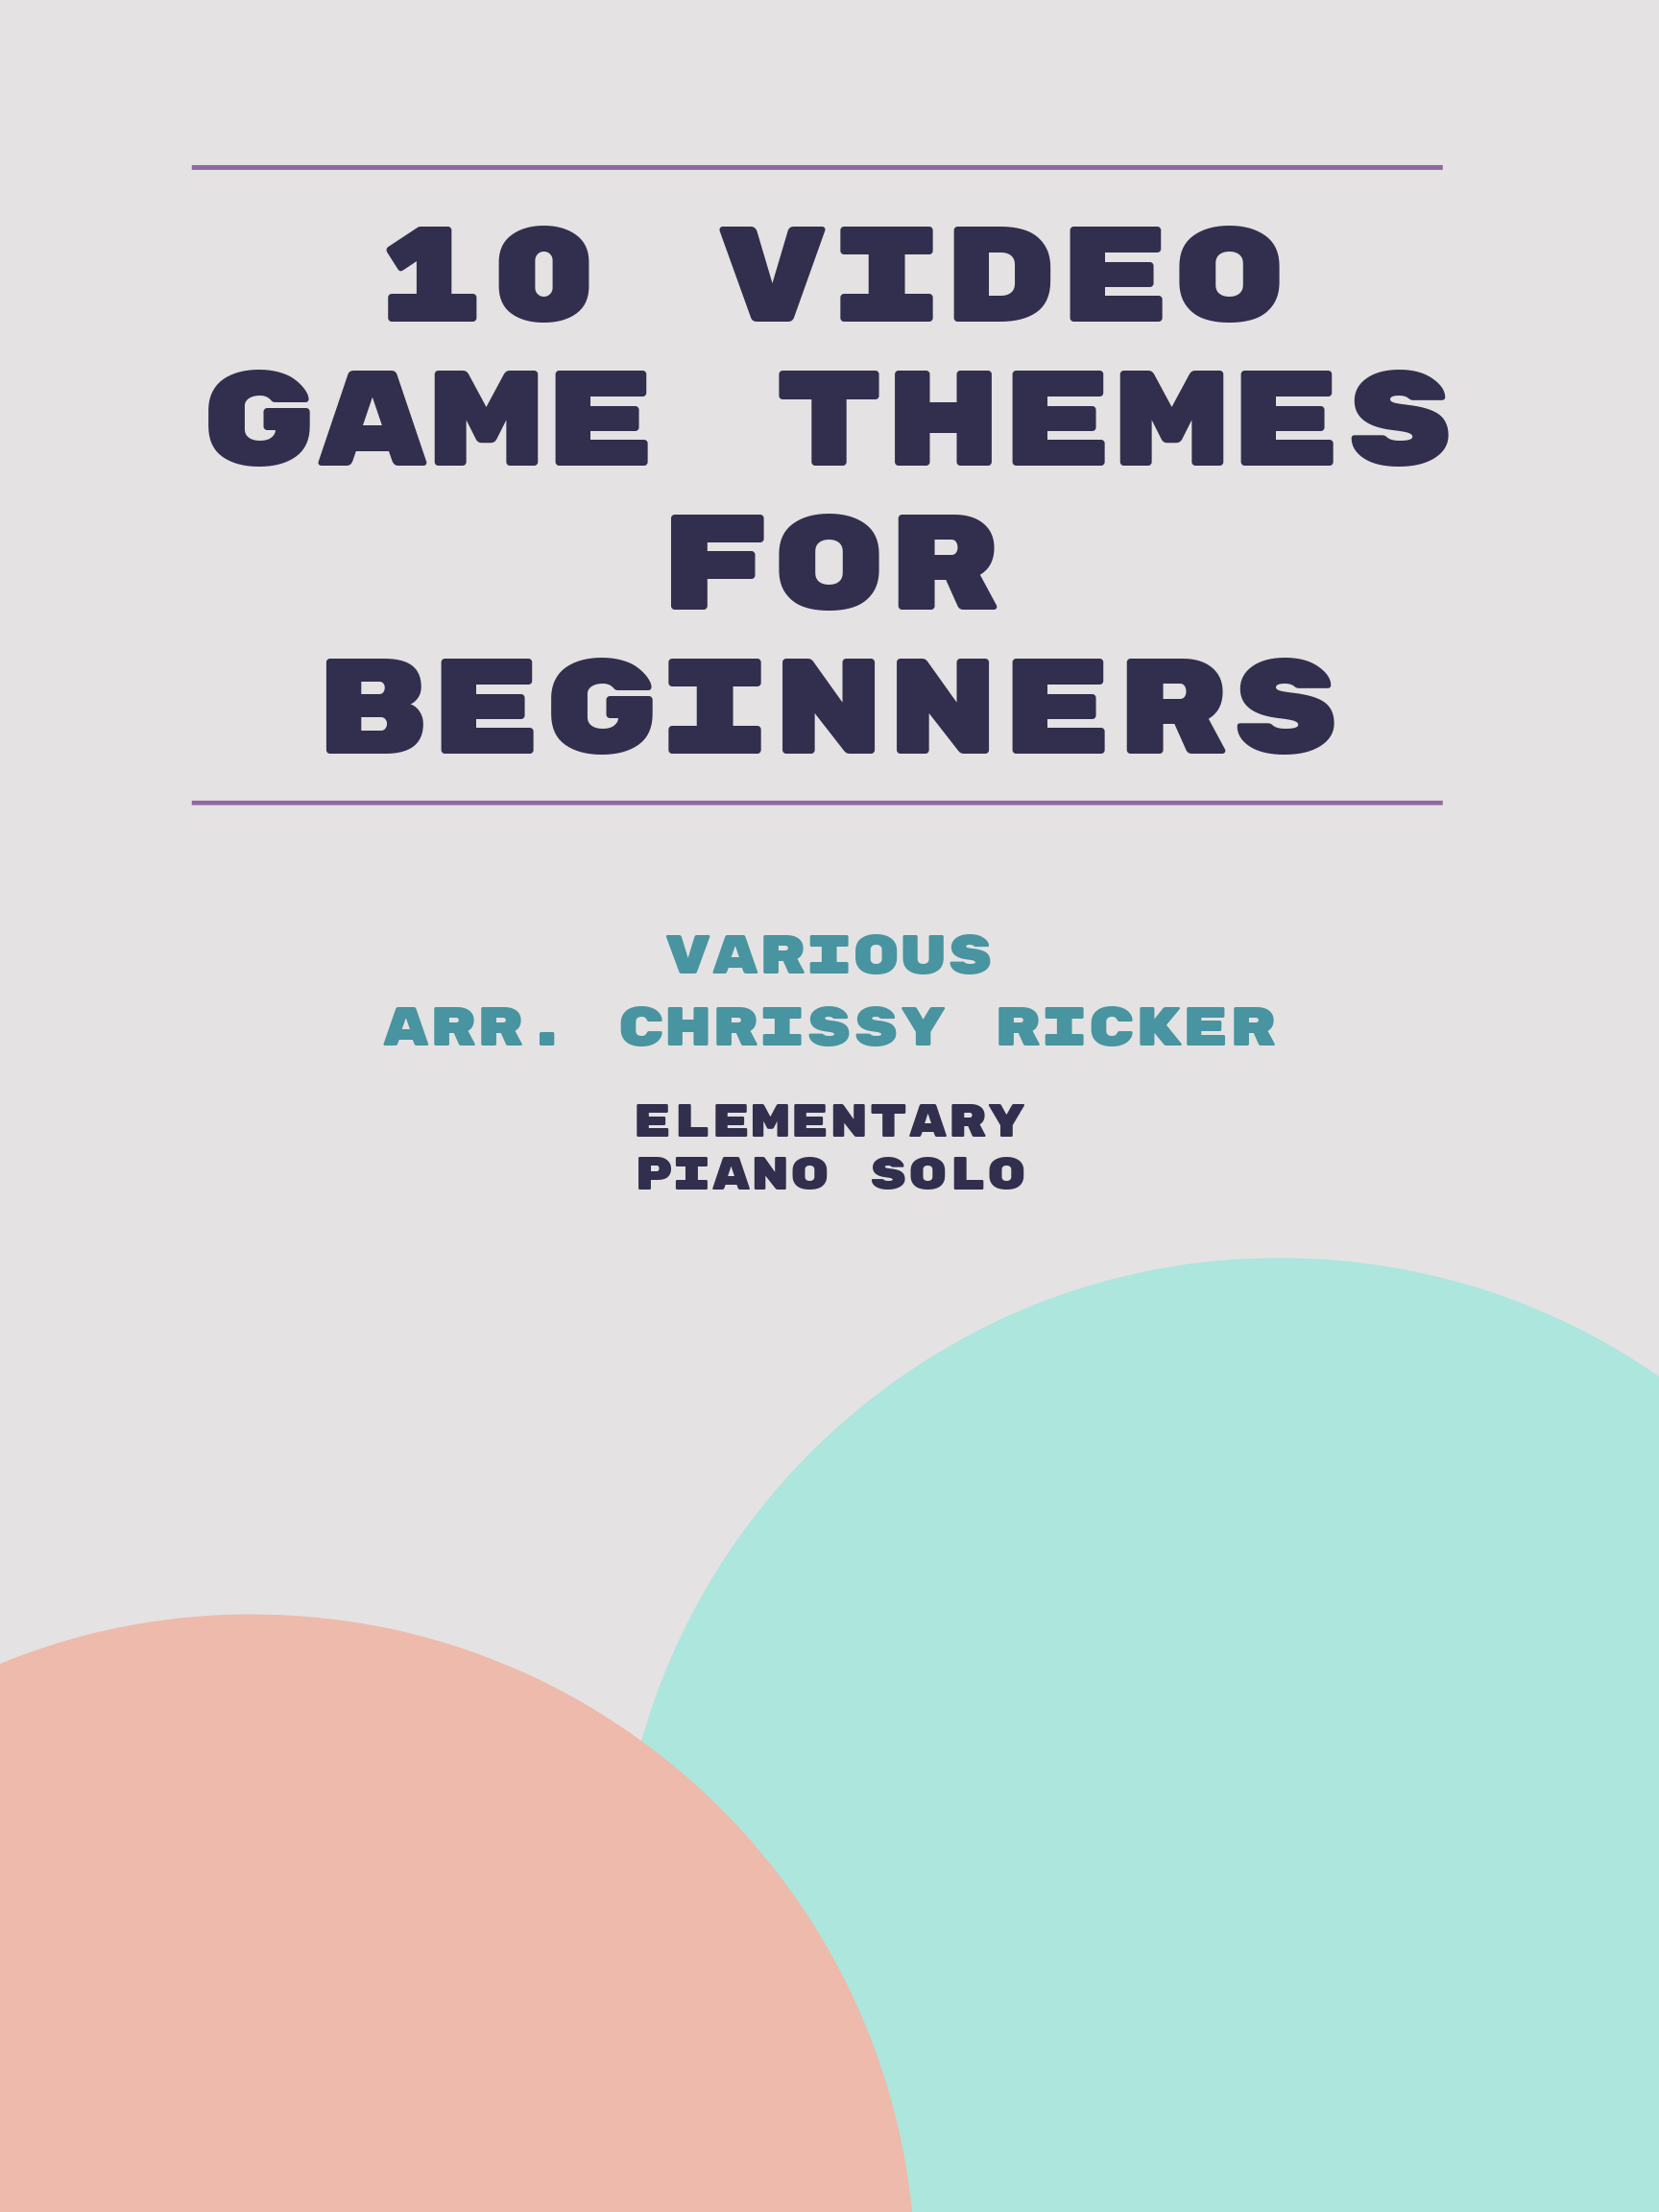 10 Video Game Themes for Beginners by Various